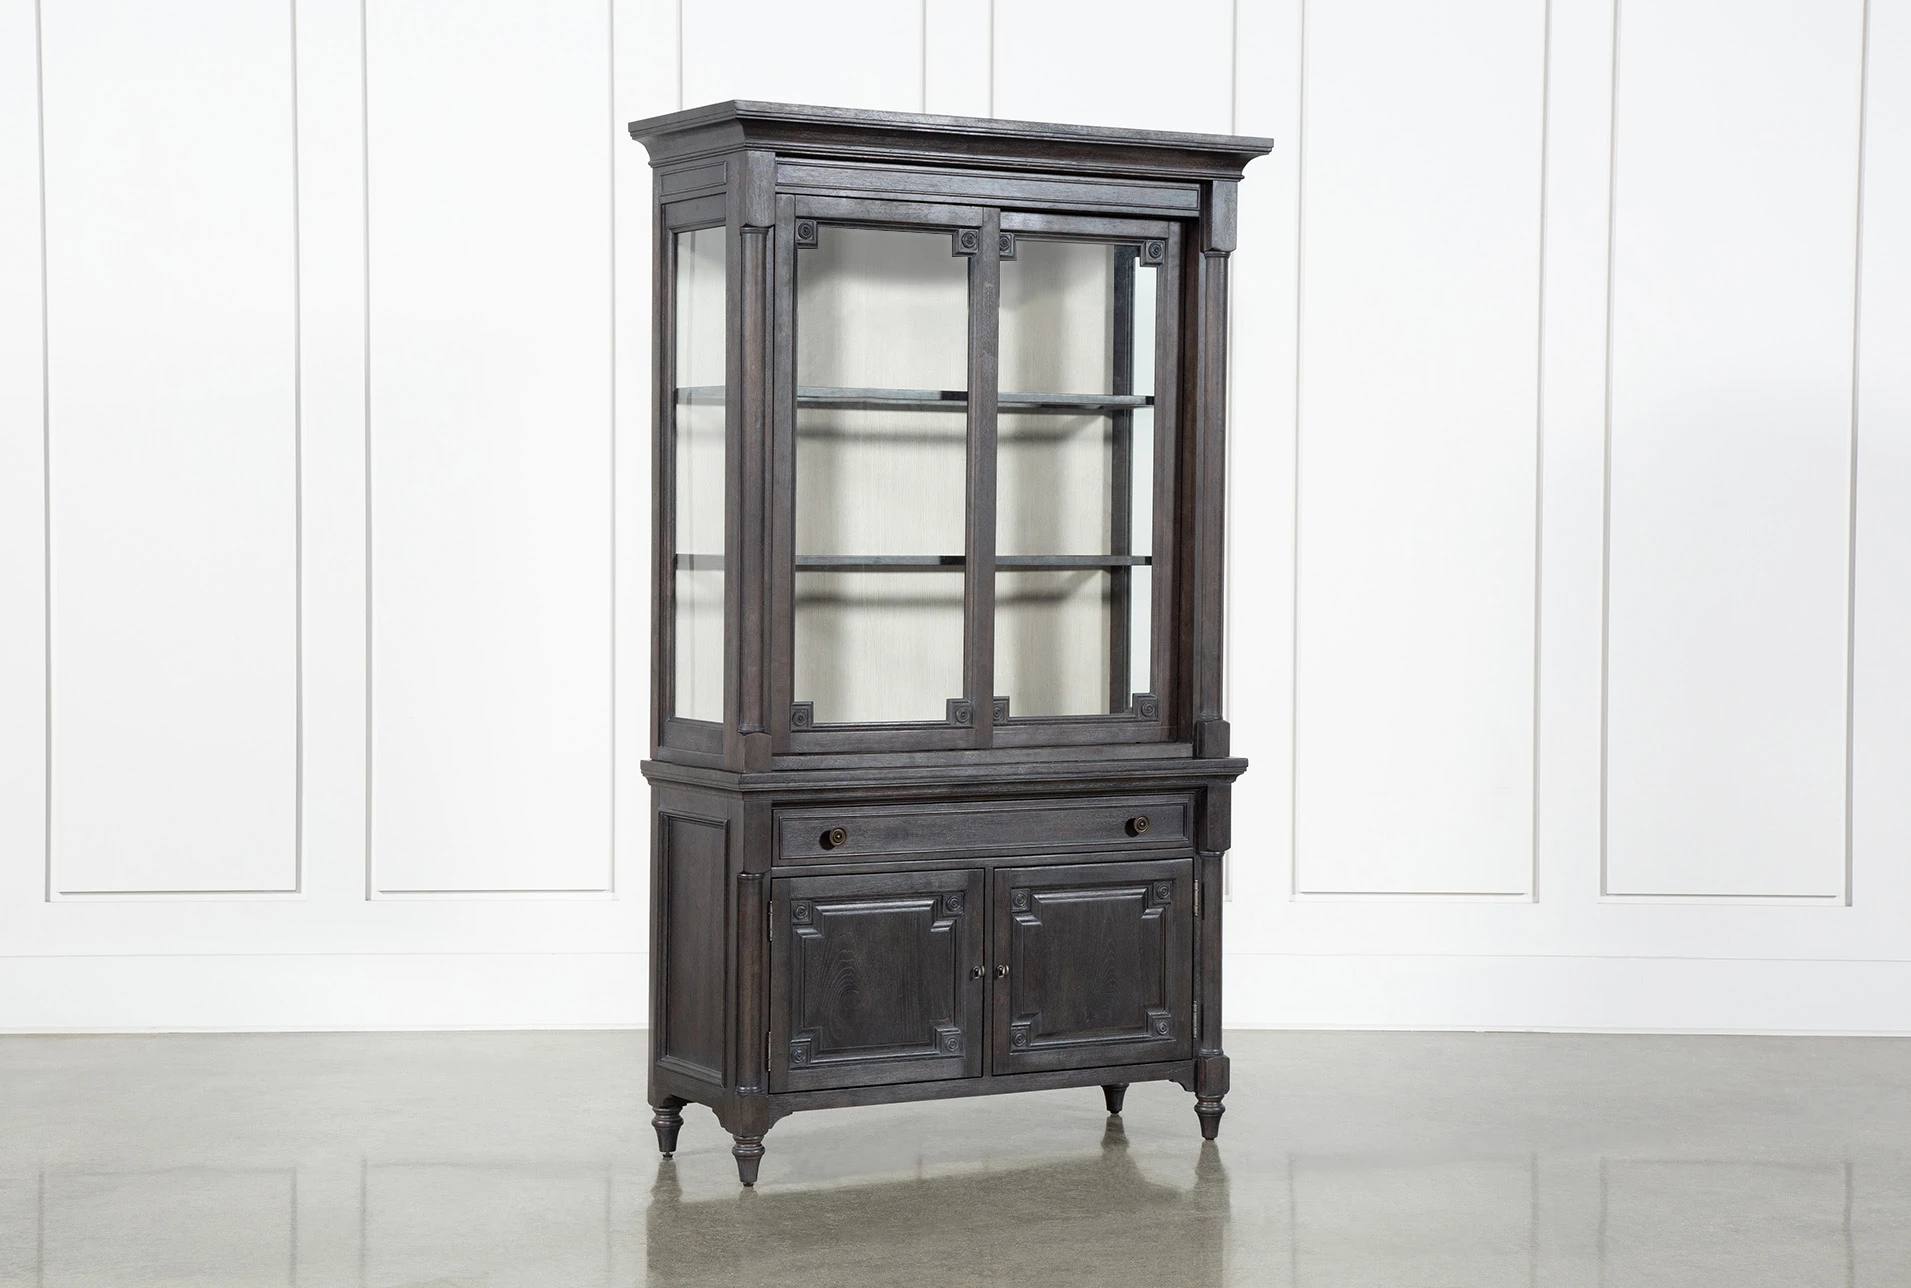 Galerie China Cabinet By Nate Berkus And Jeremiah Brent Living